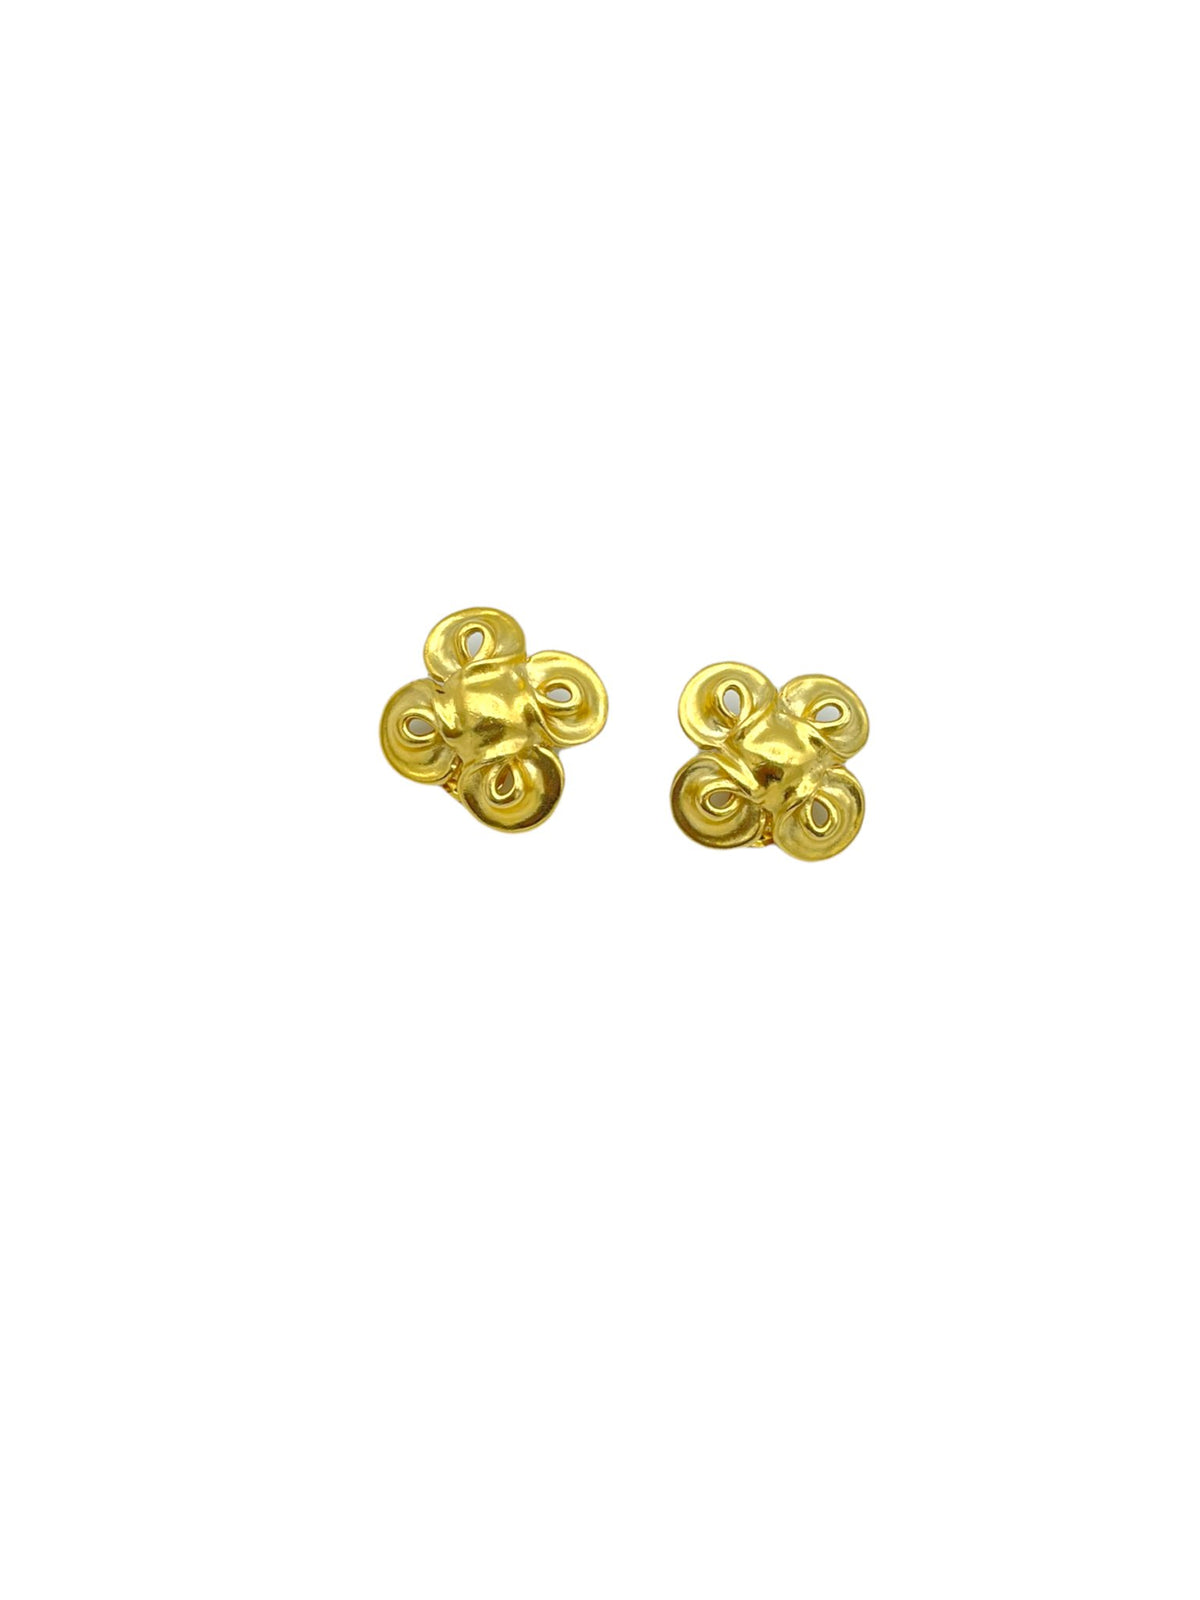 Classic Matt Gold Knot Vintage Clip-On Earrings - 24 Wishes Vintage Jewelry